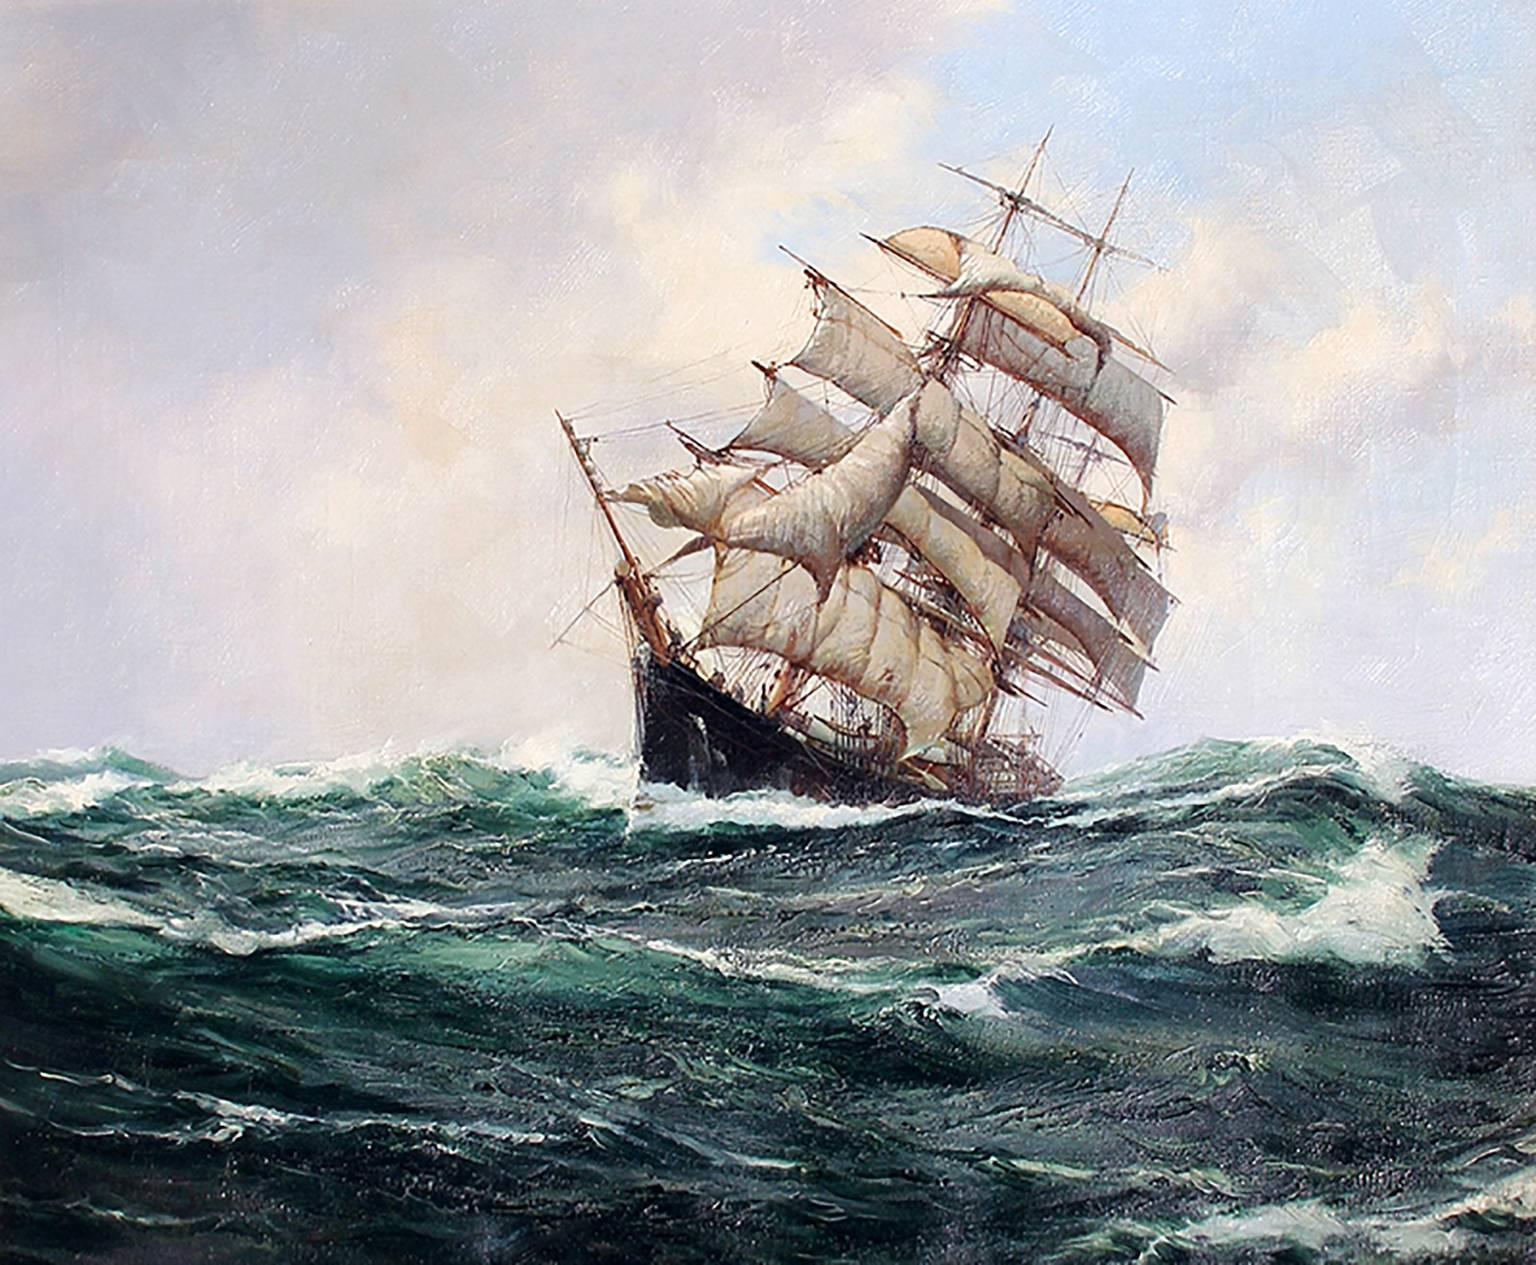 Montague Dawson Landscape Painting - The "Carrie Reed" under Full Sail, Oil on Canvas, British Maritime